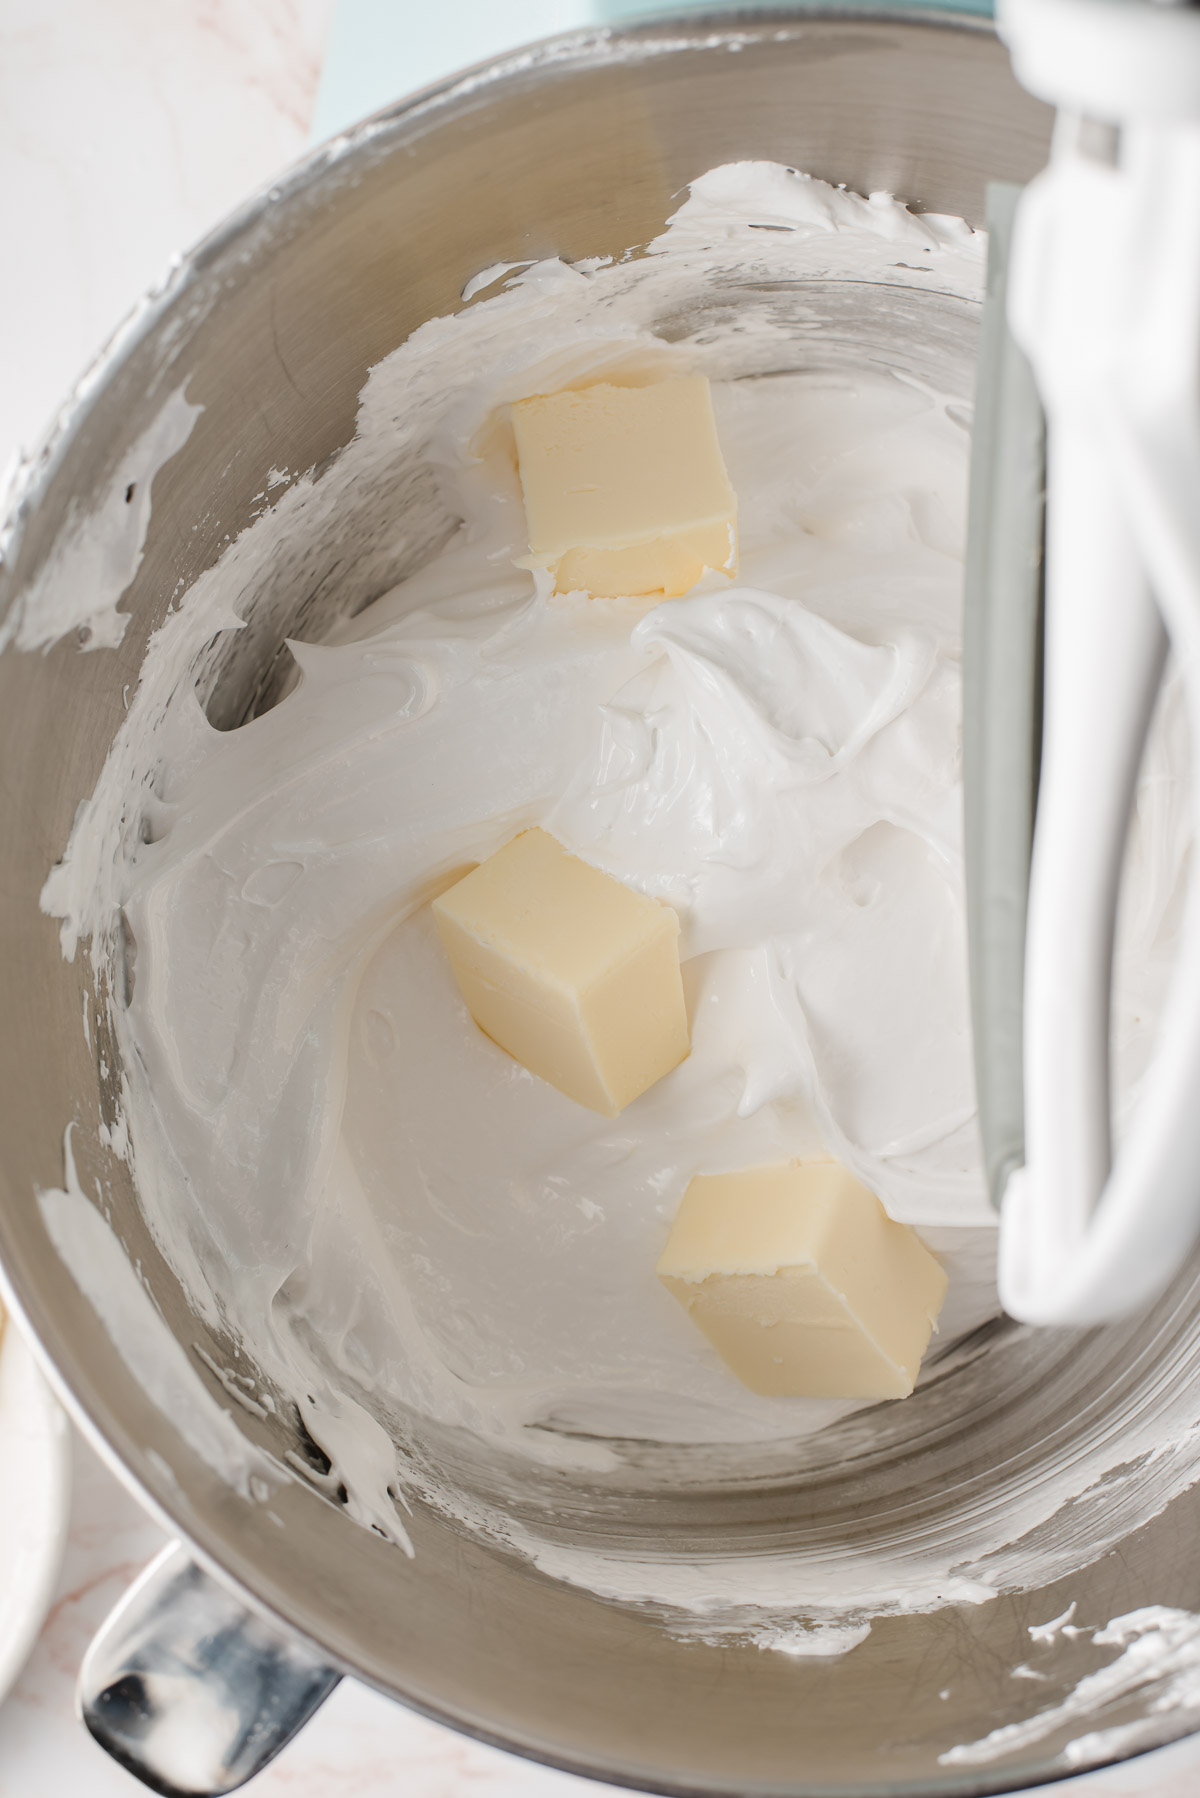 Butter cubes being mixed into whipped egg whites.